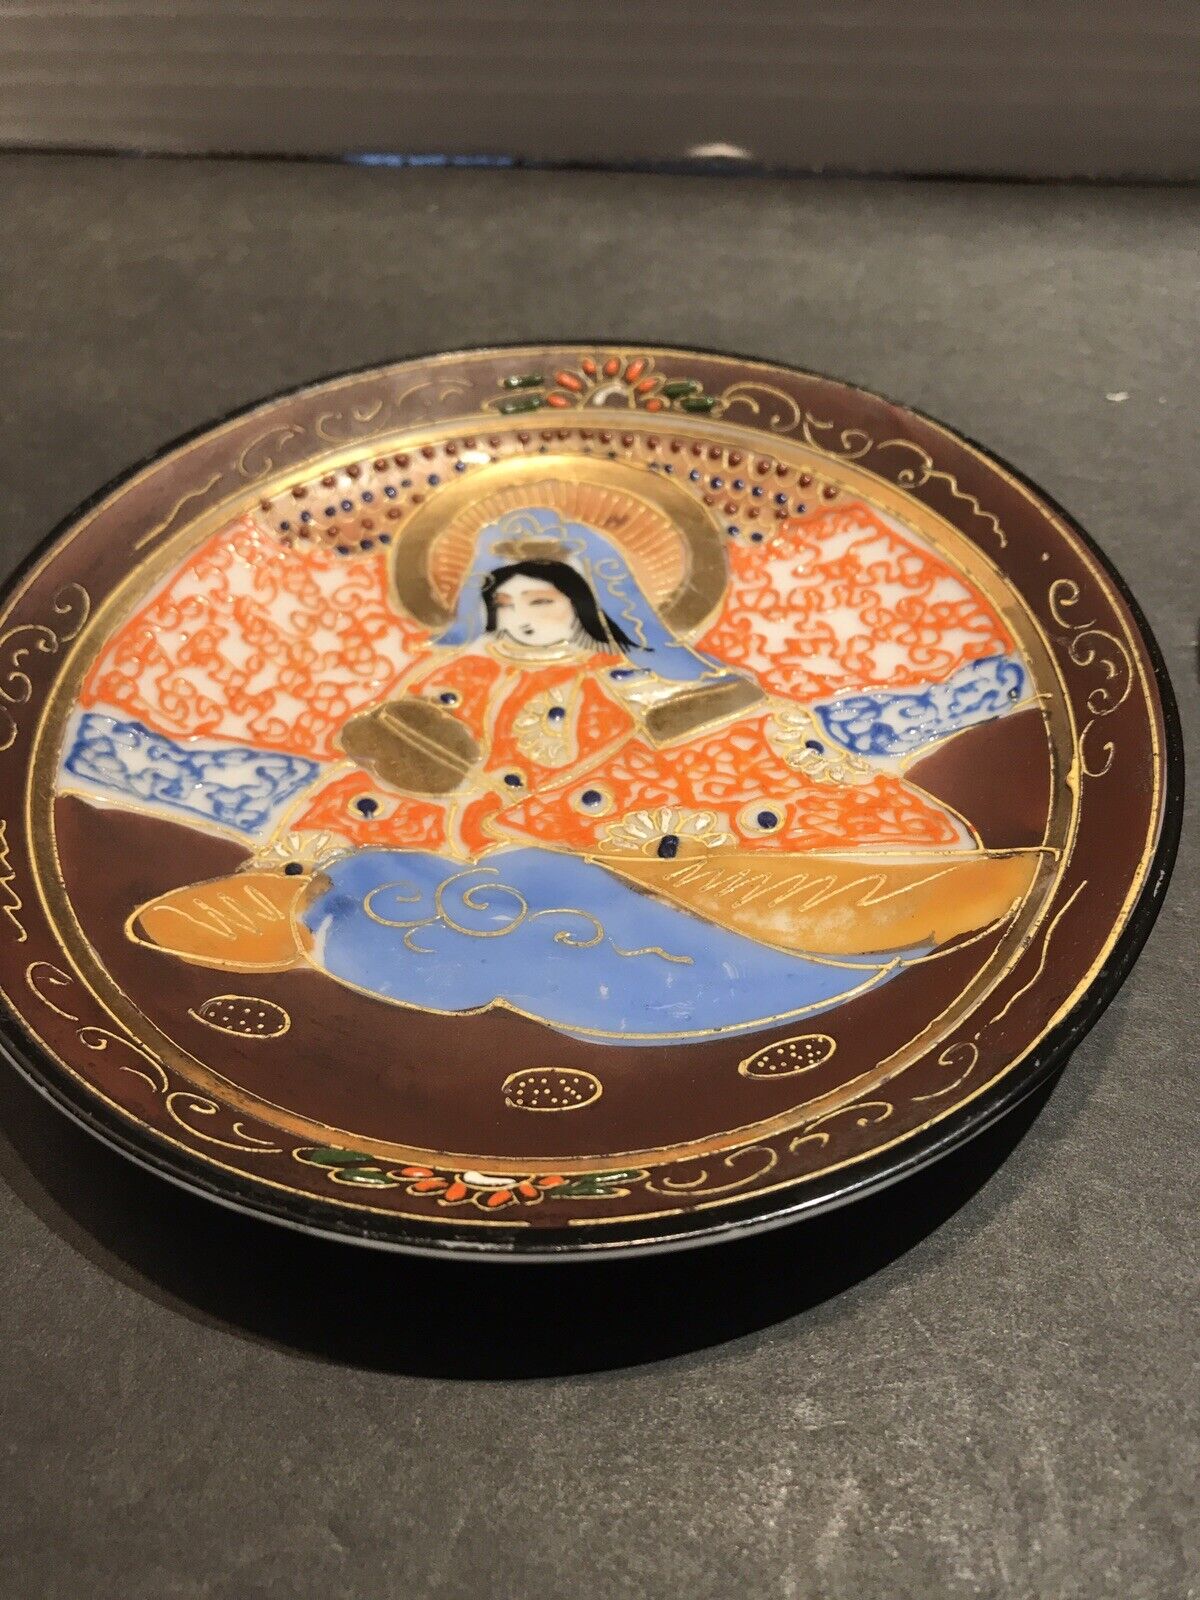 HAND PAINTED MORIAGE PORCELAIN SAUCER BY CHIKARAMACHI JAPAN